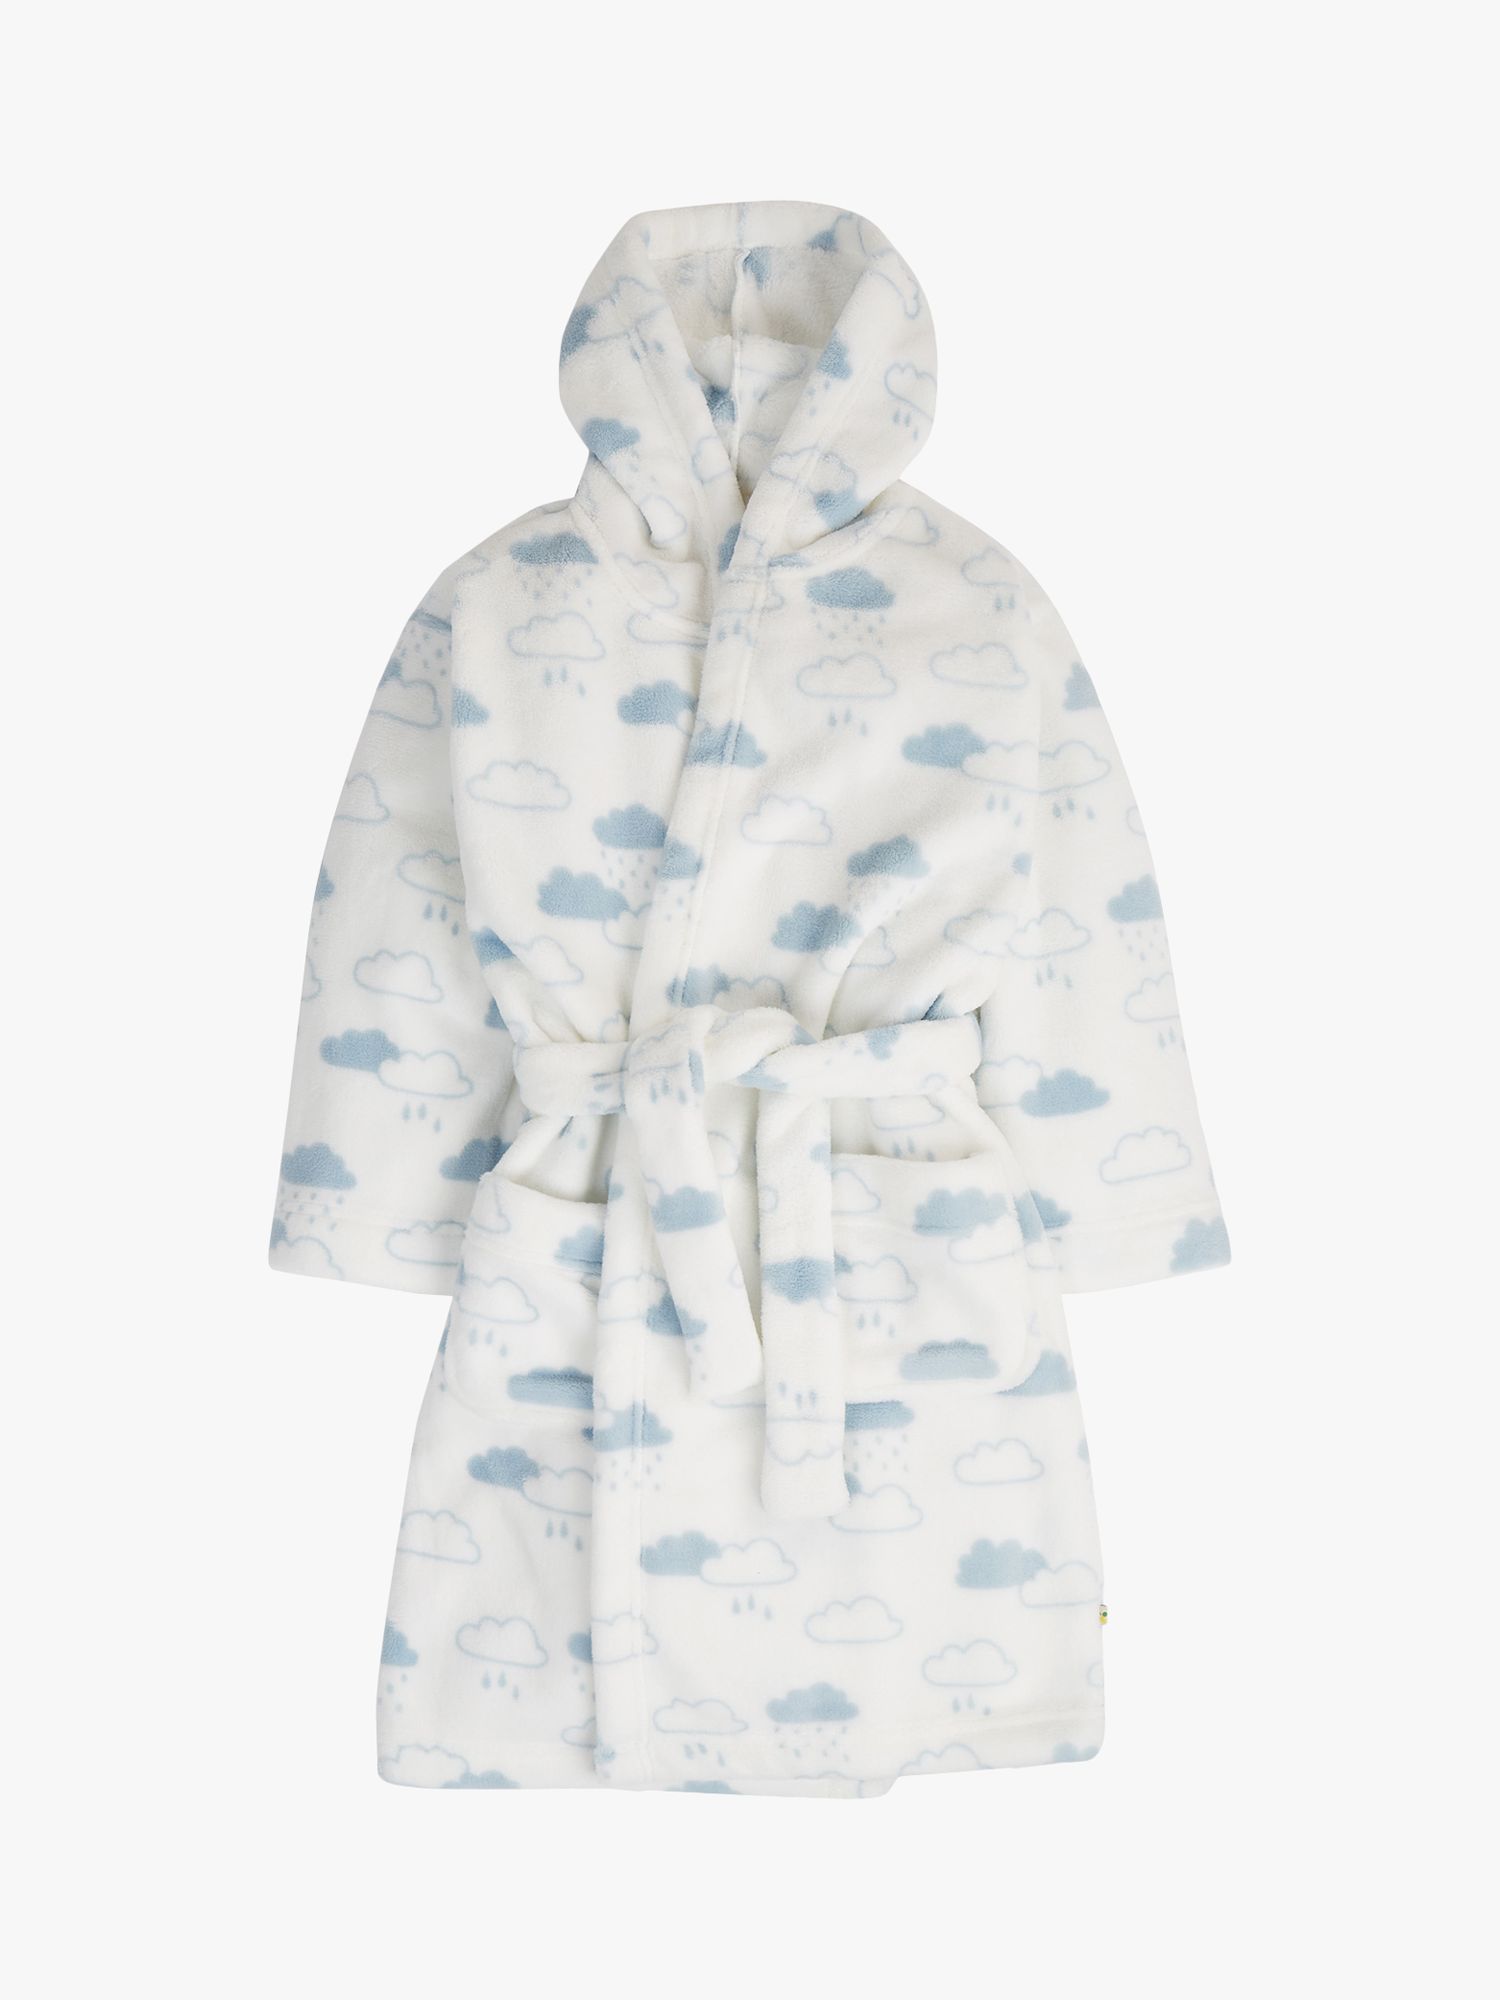 Frugi Kids' Brilliant Clouds Hooded Robe, White/Blue, 5-6 years